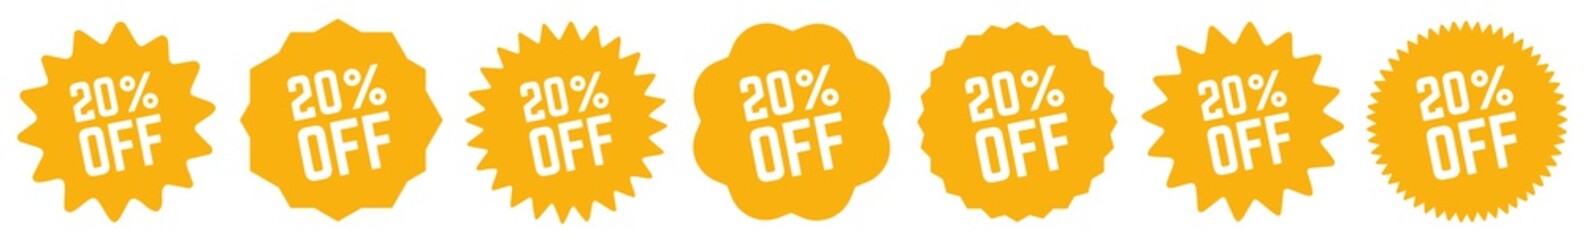 20 Percent OFF Discount Tag Orange | Special Offer Icon | Sale Sticker | Deal Label | Variations